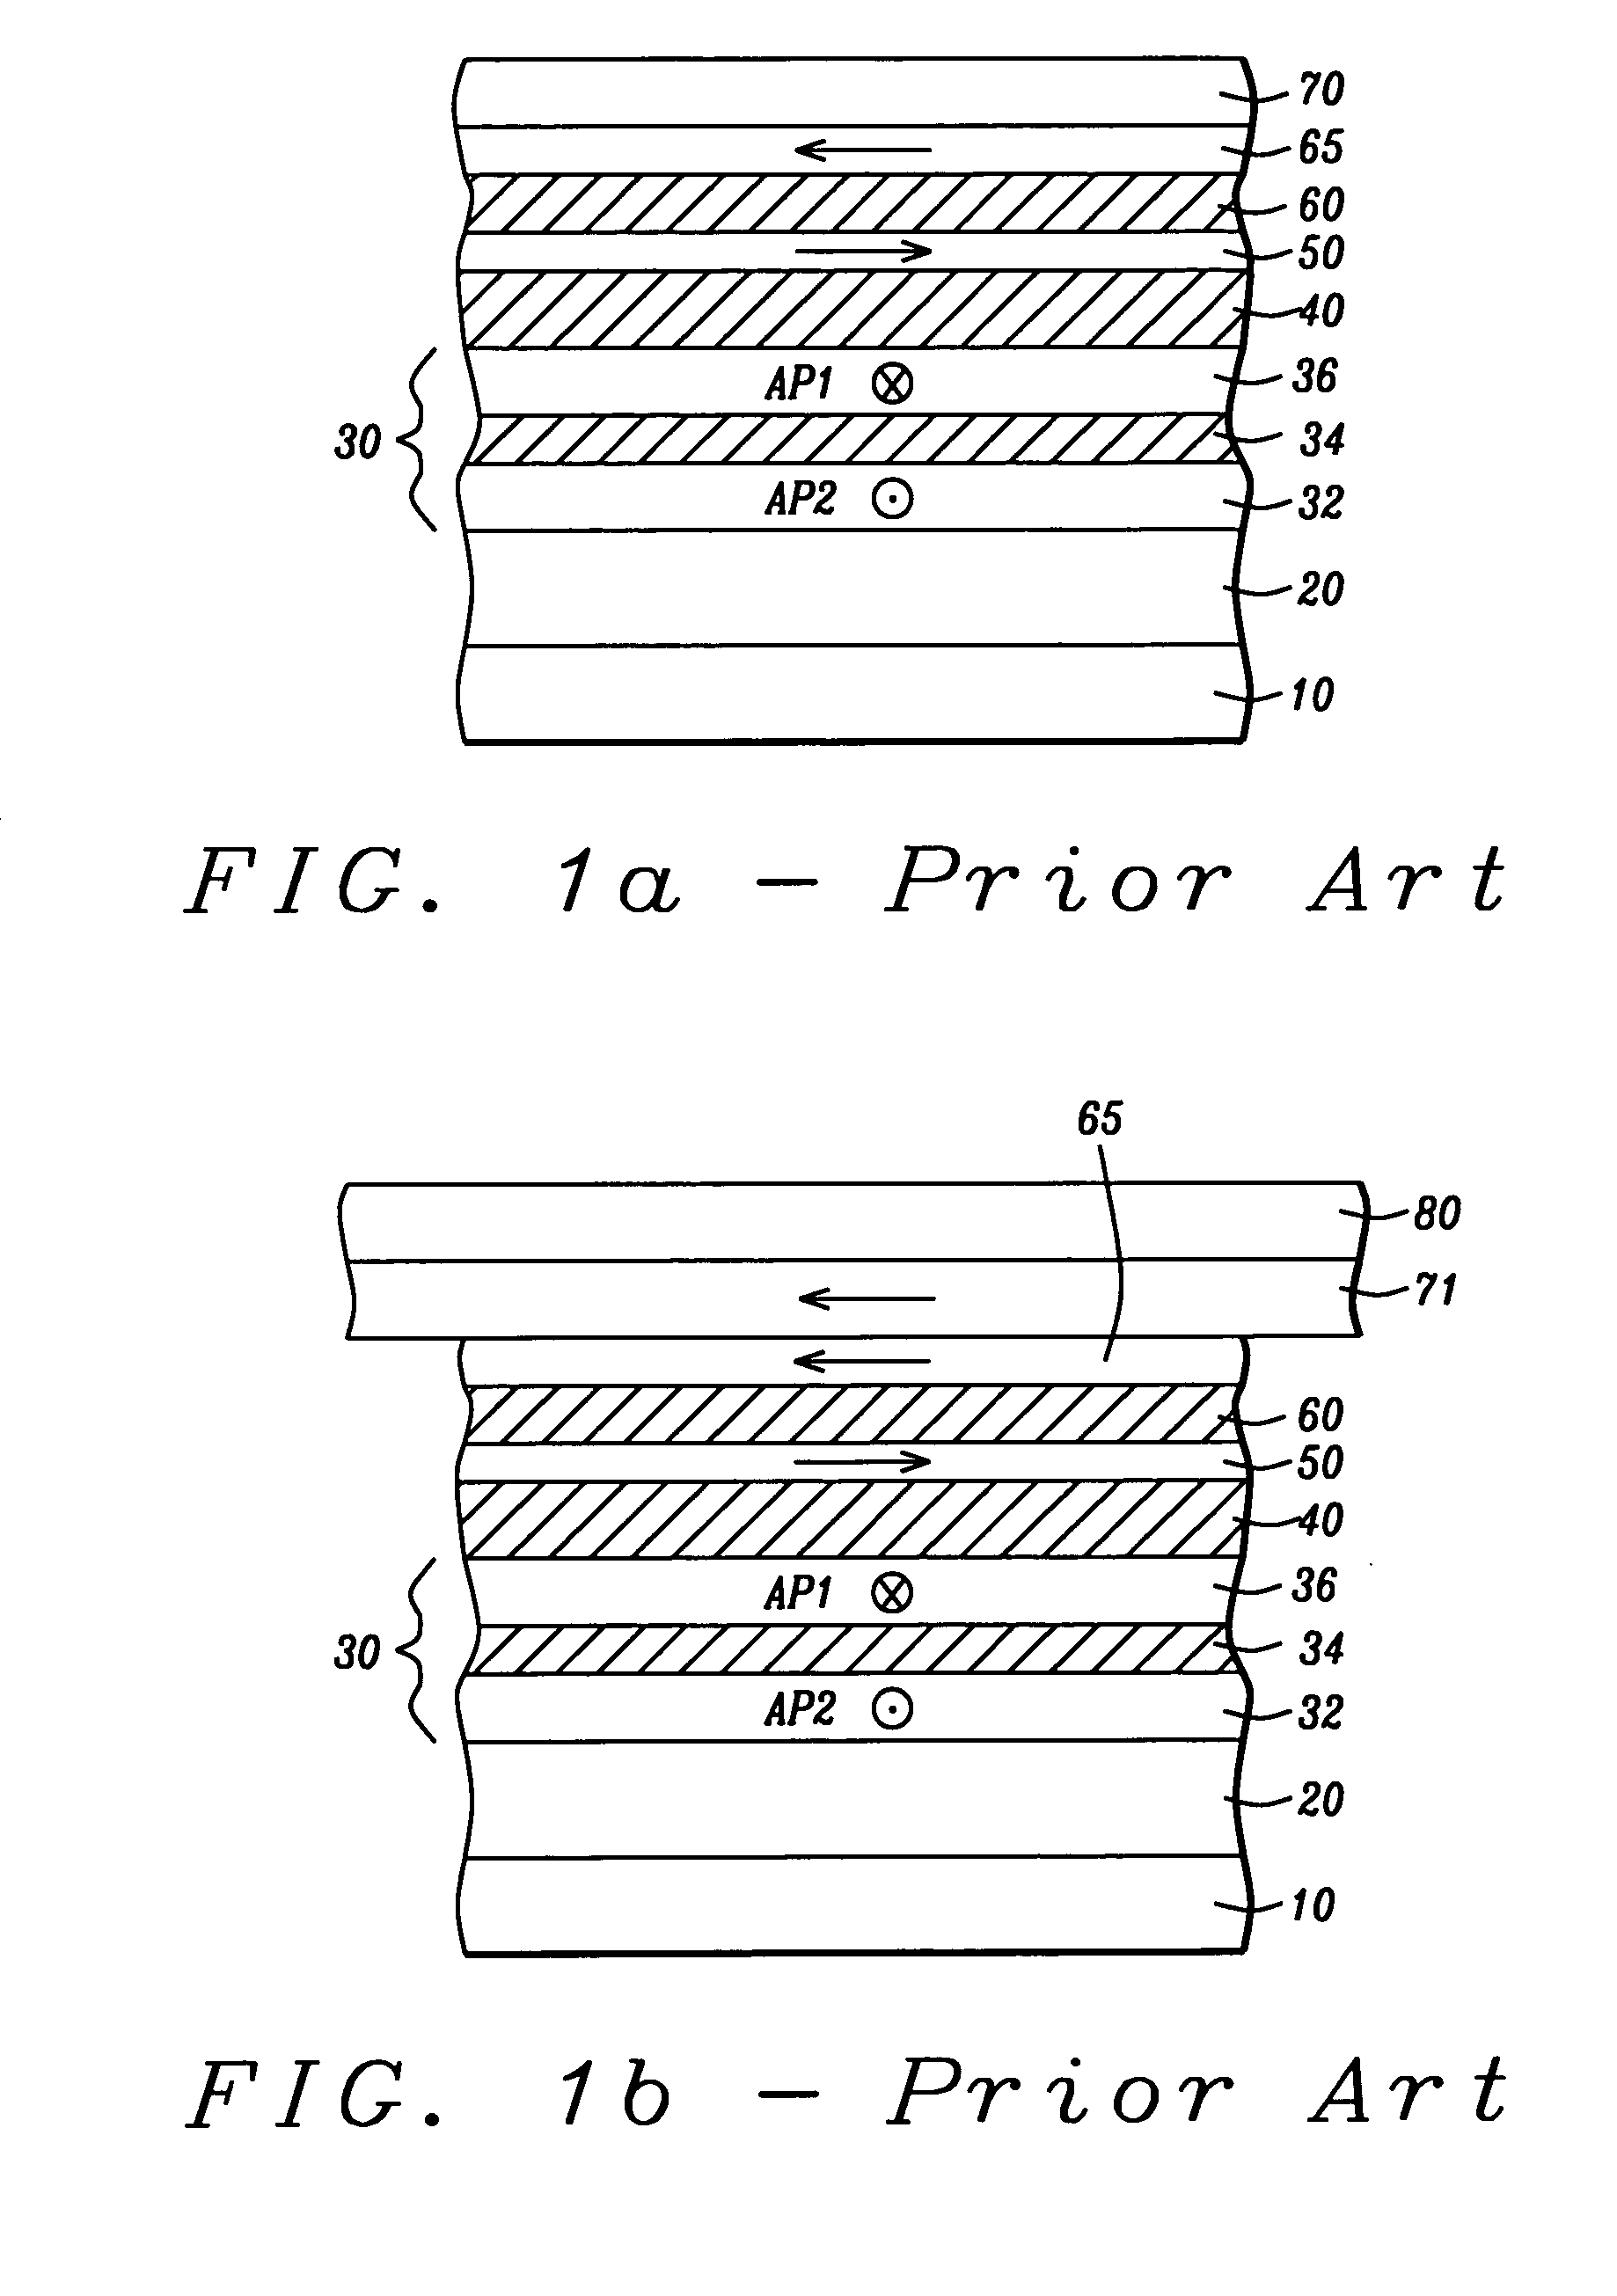 Fabrication method for an in-stack stabilized synthetic stitched CPP GMR head